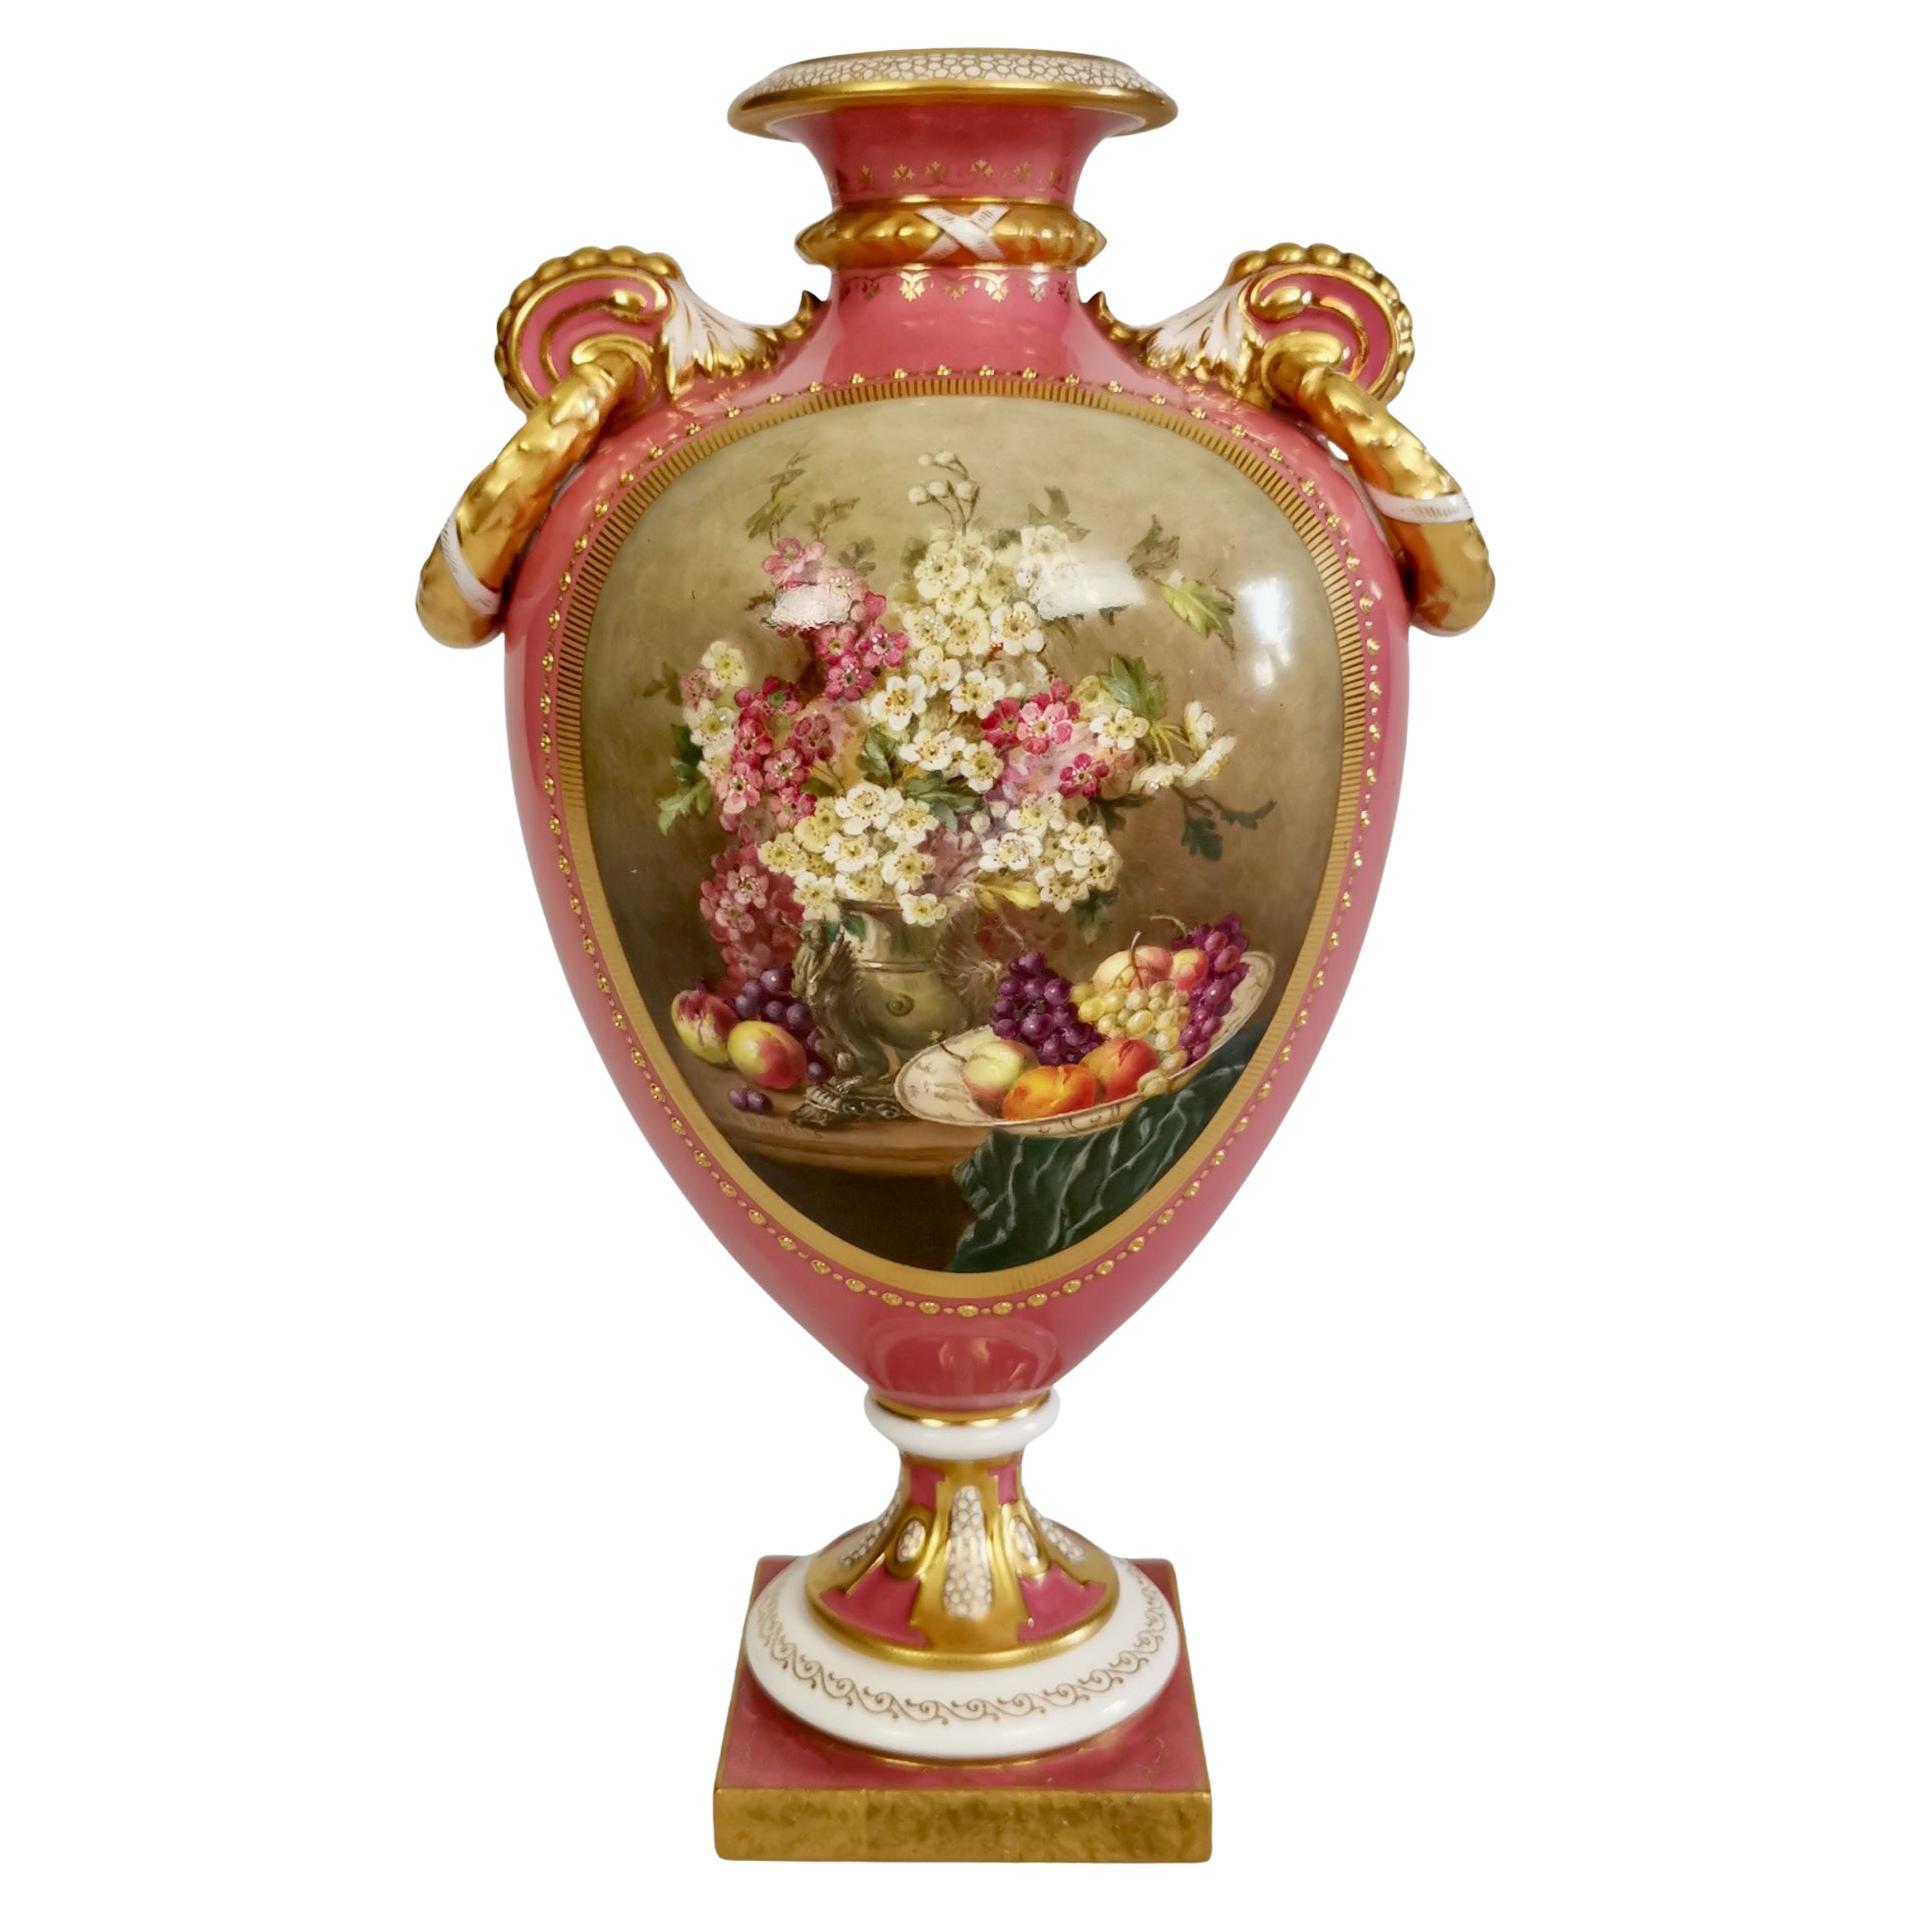 Royal Worcester Vase, Pink with Flowers and Fruits, Signed William Hawkins, 1917